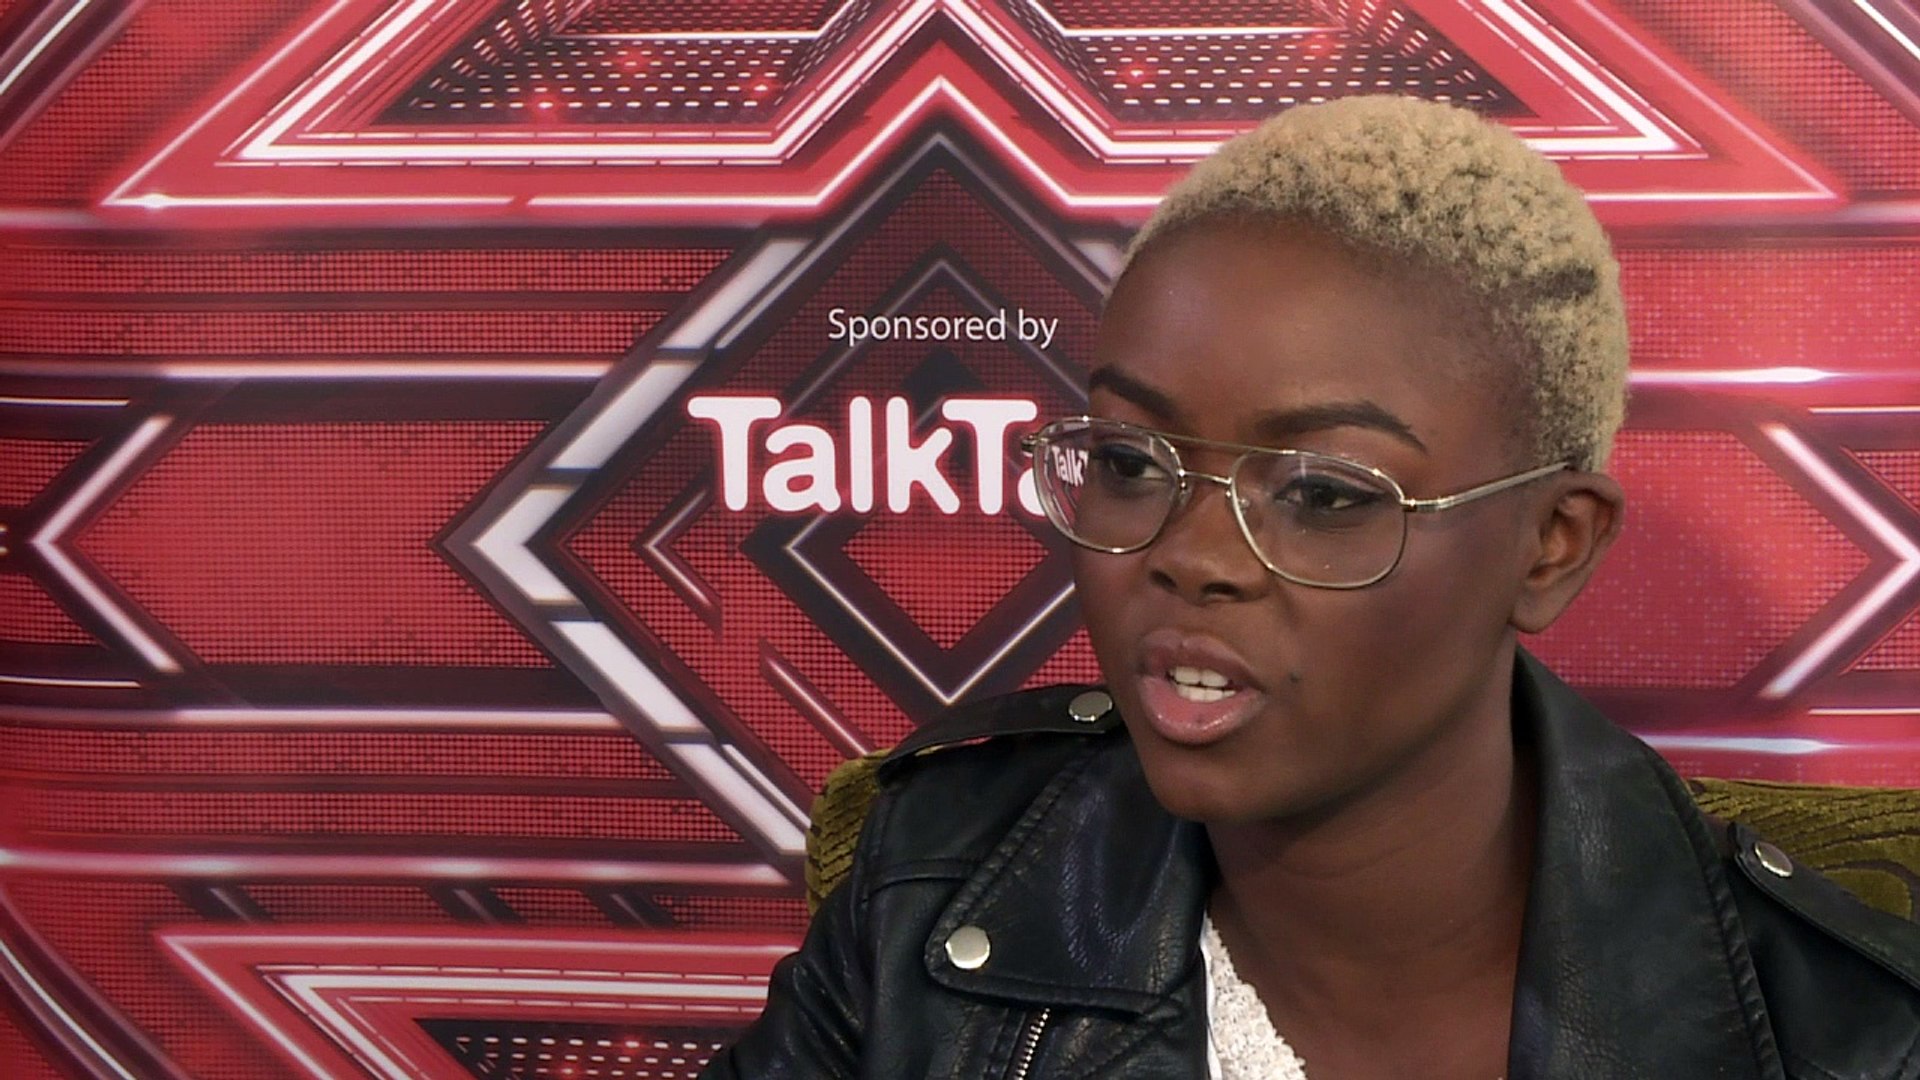 X Factor: Gifty was 'told' she was going home on Saturday